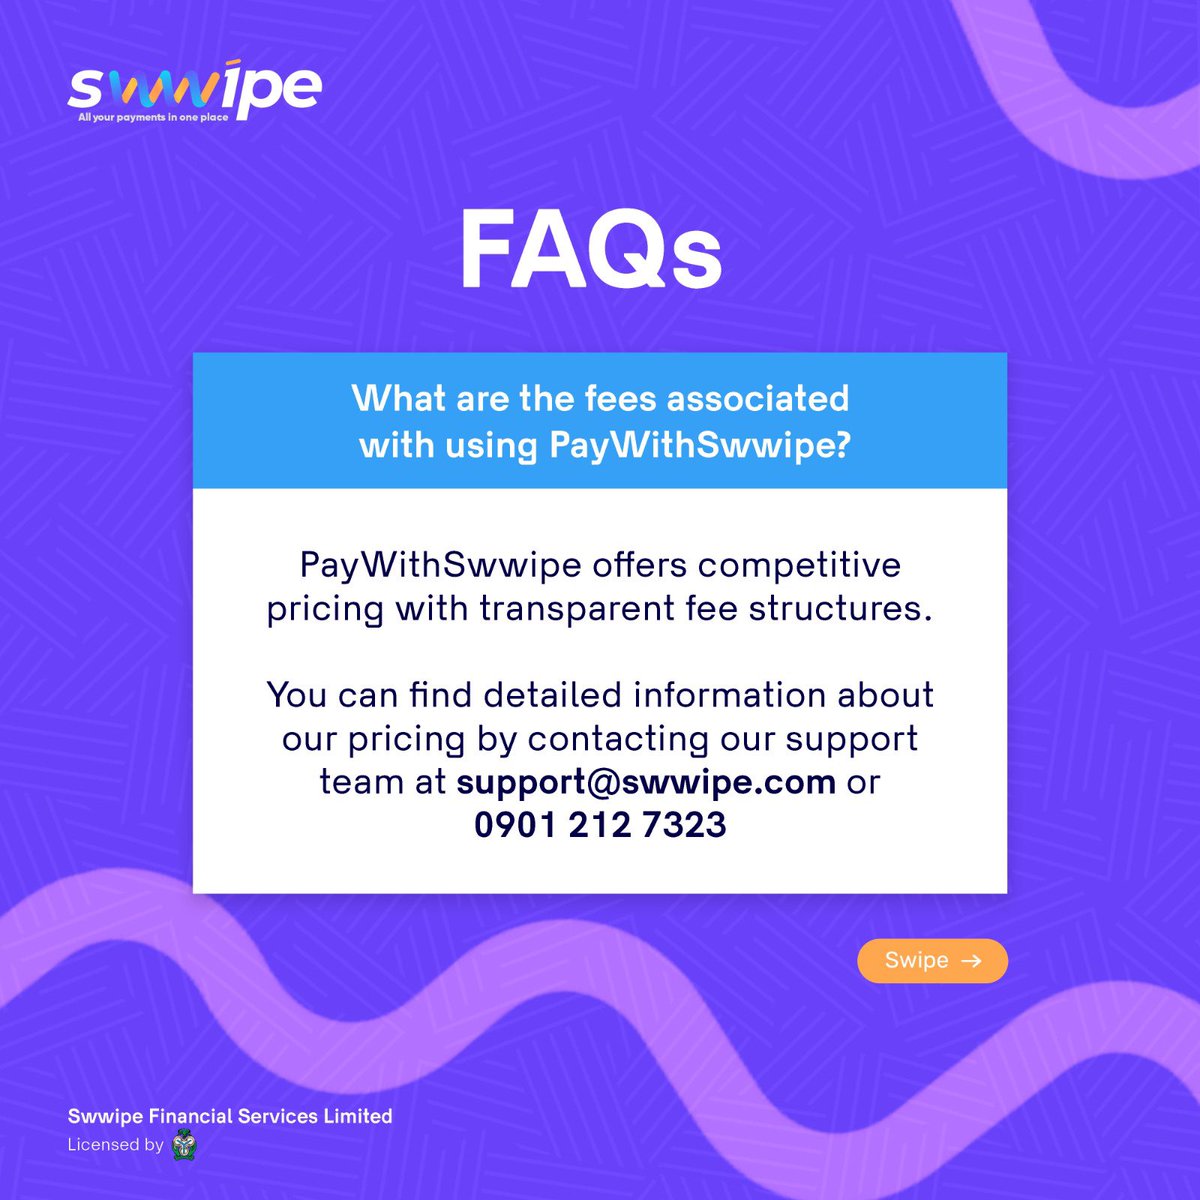 Discover why PayWithSwwipe is your ultimate choice to receive payment on your website or app.

Here are a few FAQs with clear answers.

For more information, kindly contact support@swwipe.com or call 0901 212 7323.

#swwipe #paywithswwipe #paymentgateway #onlinepayment